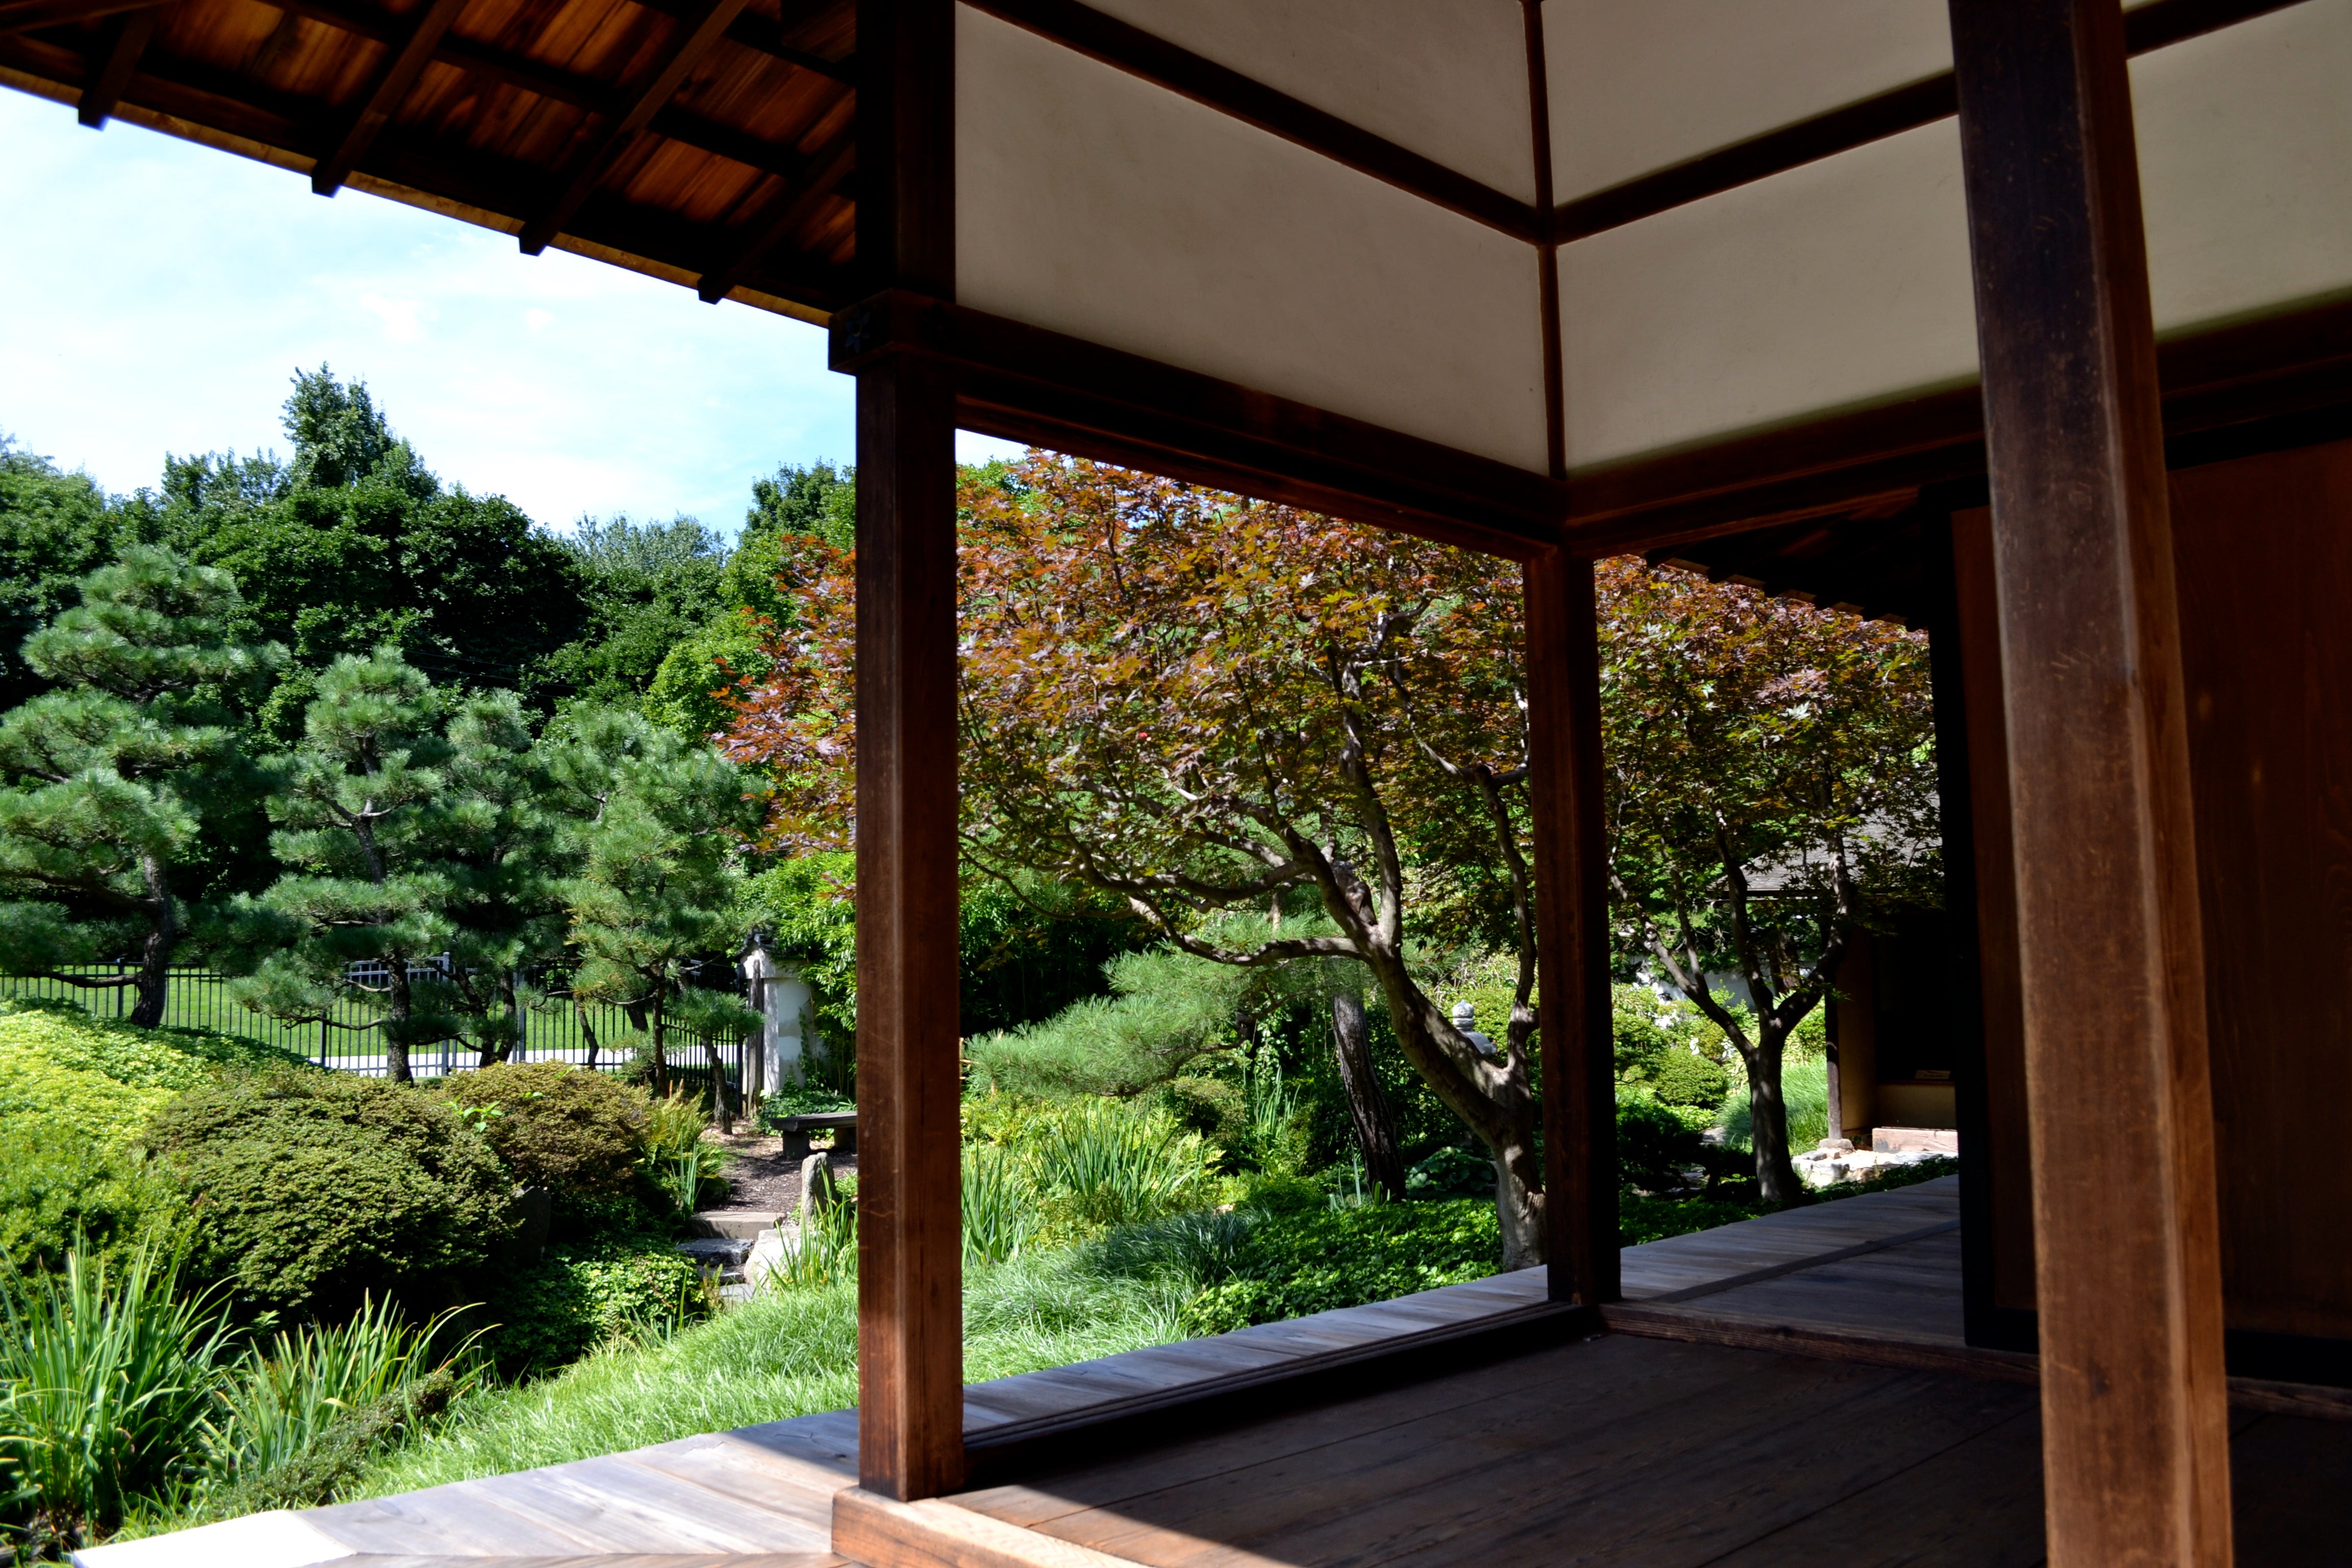 The house looks out onto the authentic, and now newly restored, Japanese garden